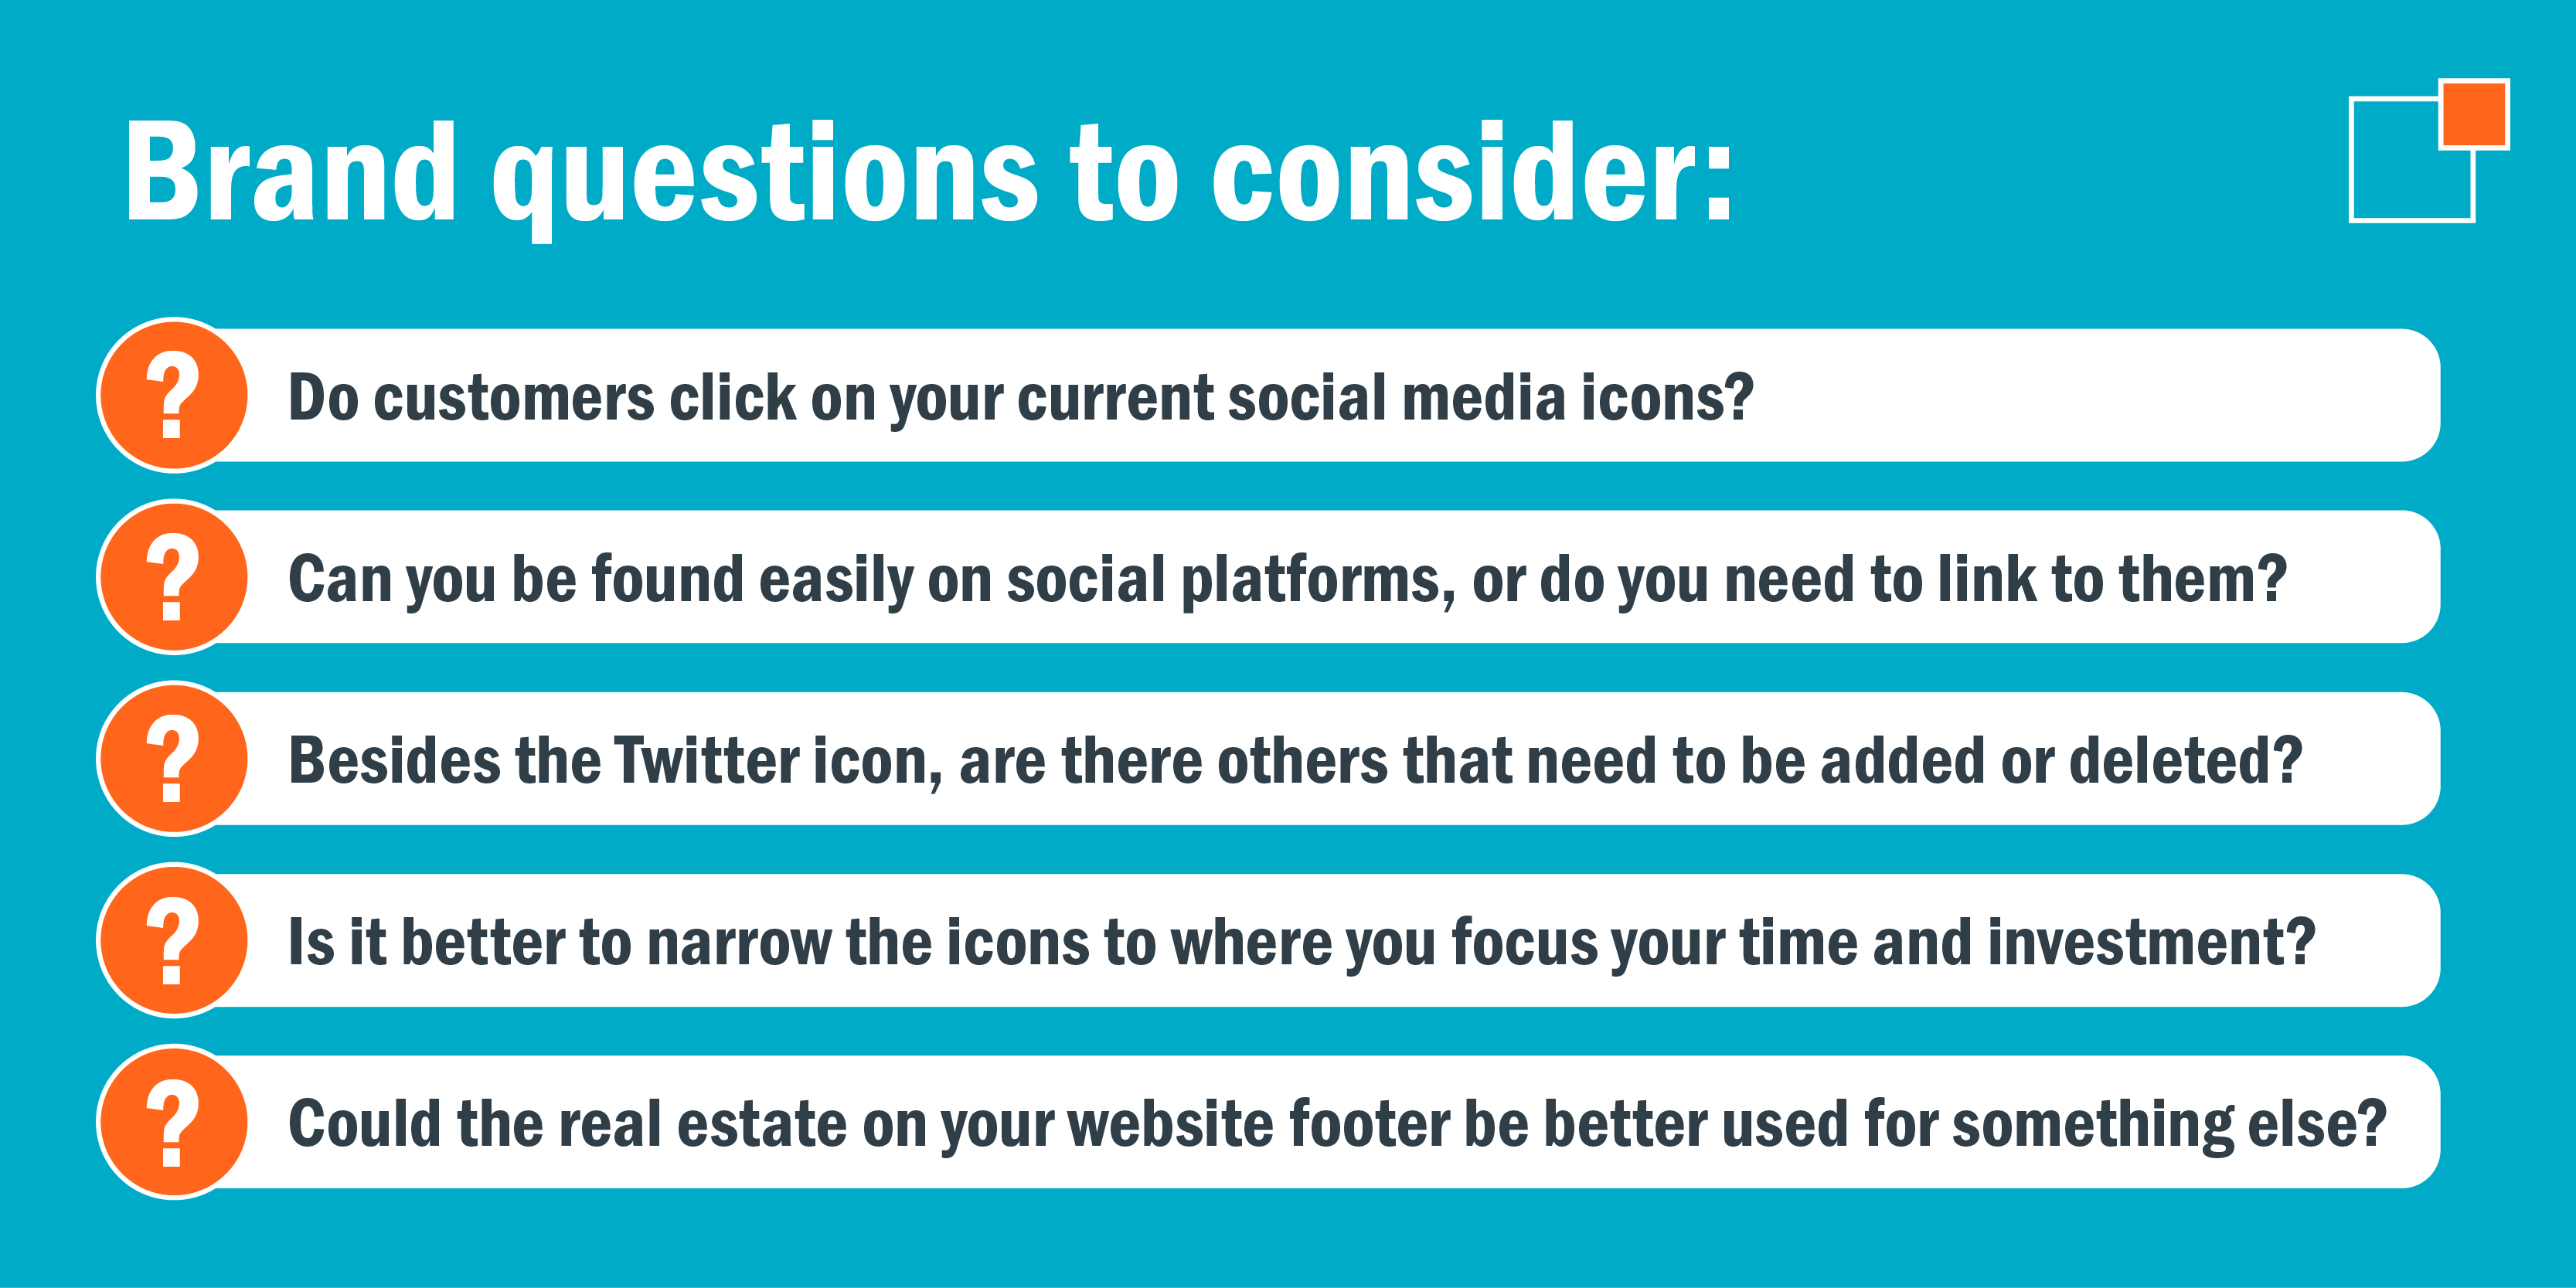 Brand questions to consider: - Do customers click on your current social media icons? - Can you be found easily on social platforms, or do you need to link to them? - Besides the Twitter icon, are there others that need to be added or deleted? - Is it better to narrow the icons to where you focus your time and investment? - Could the real estate on your website footer be better used for something else?